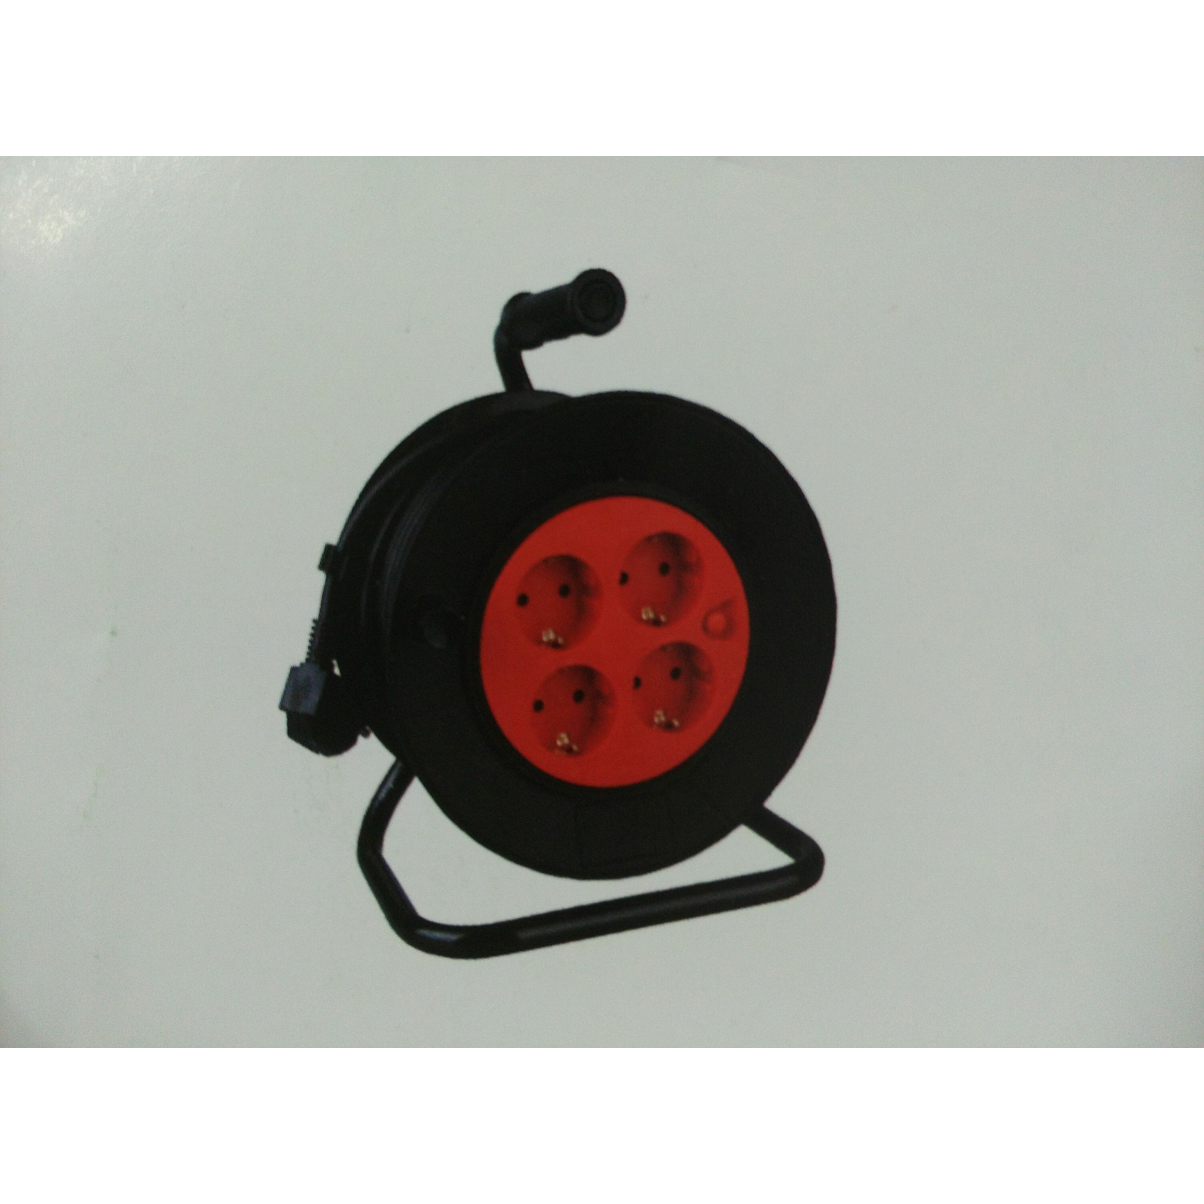 Cable reel with 4 plates socket,HV04VV-F 3G 1,5mm2 25m 